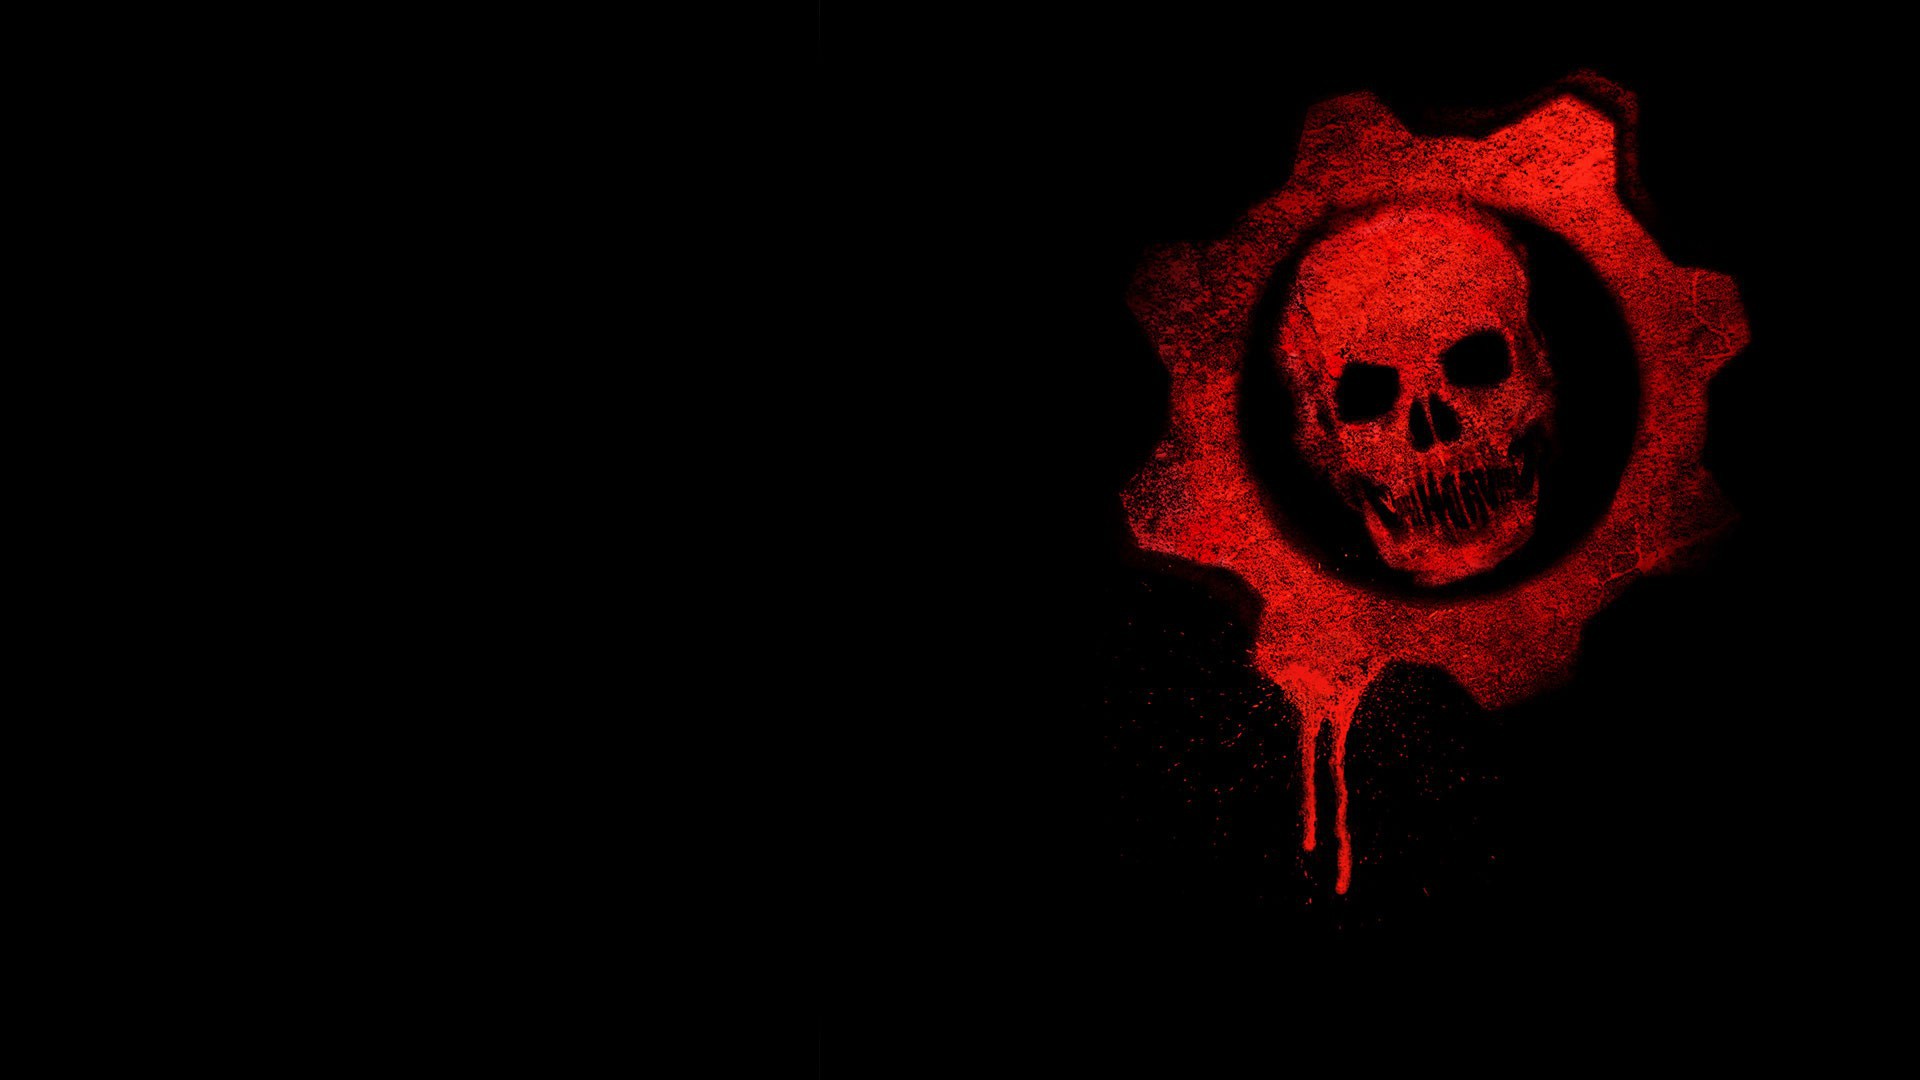 Logo game Gears of War background wallpapers and images